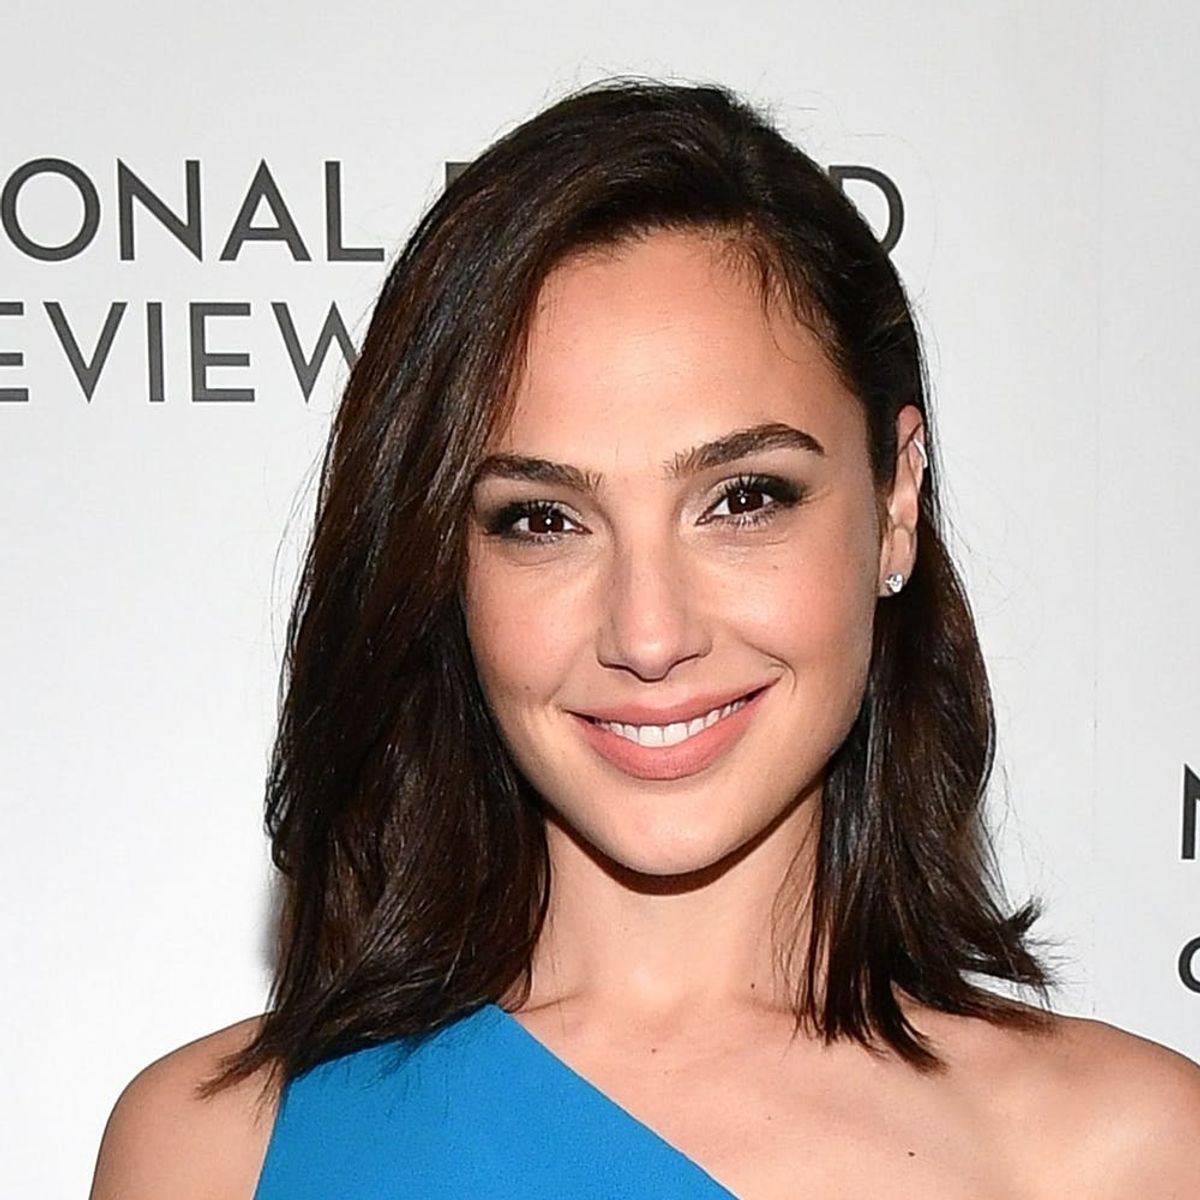 Gal Gadot Just Nabbed a Major Beauty Deal With *This* Iconic Brand